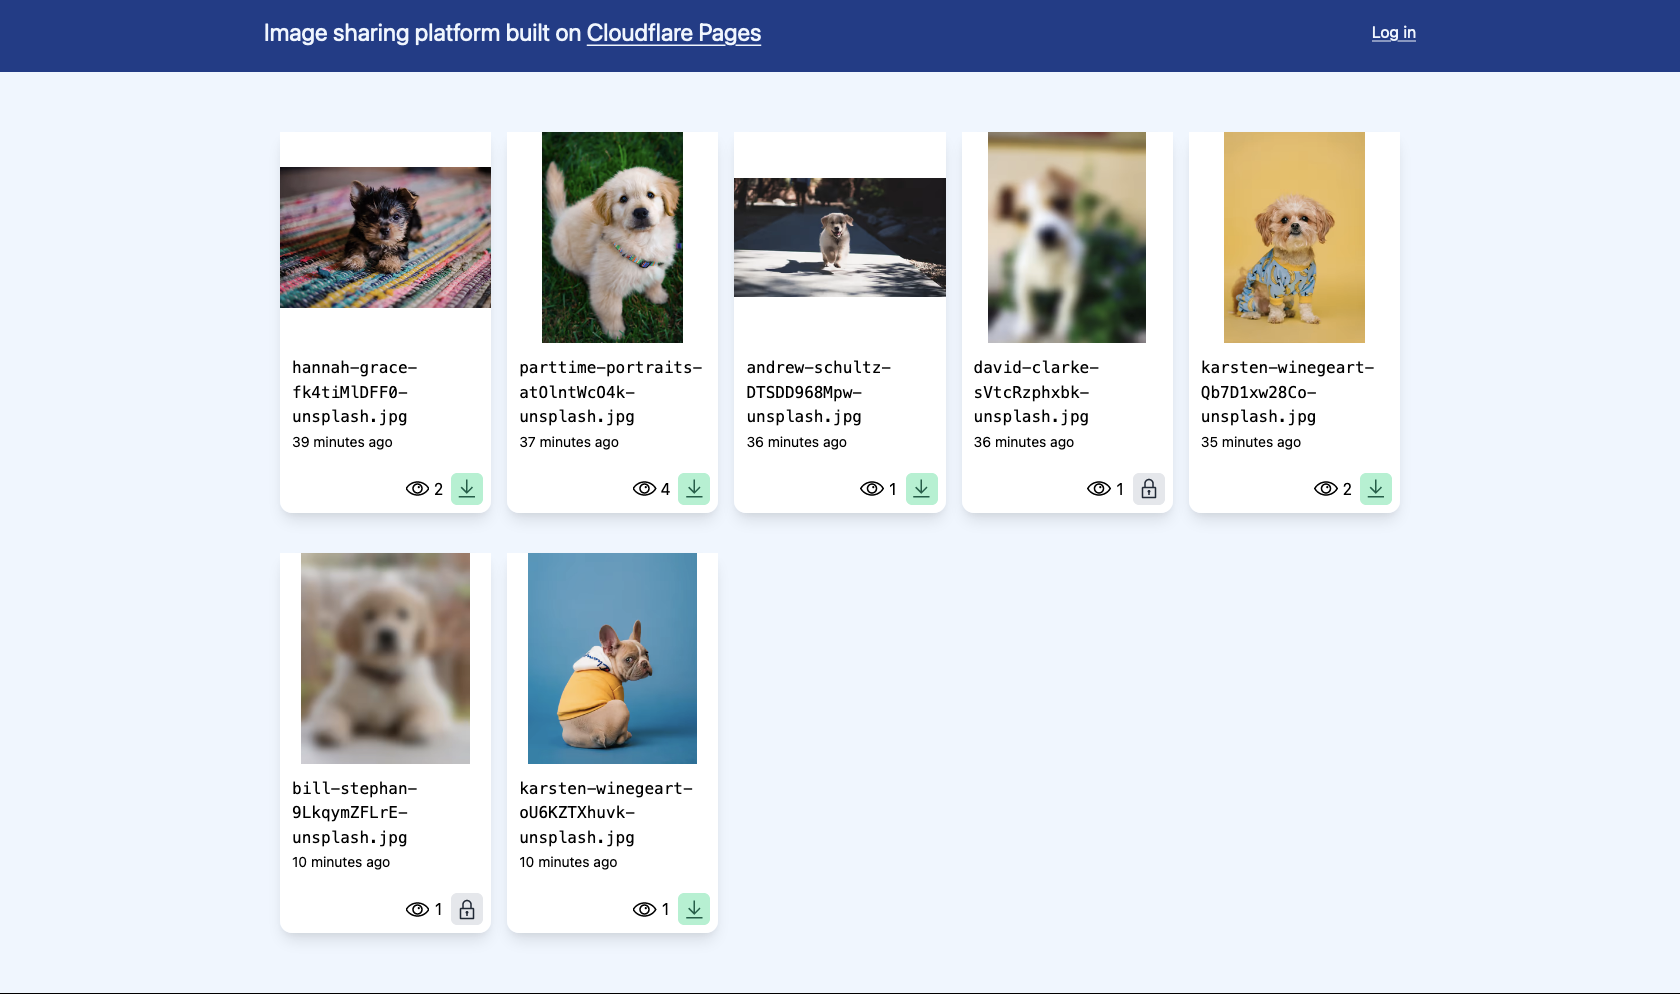 Screenshot of the image sharing platform showcasing seven pictures of puppies